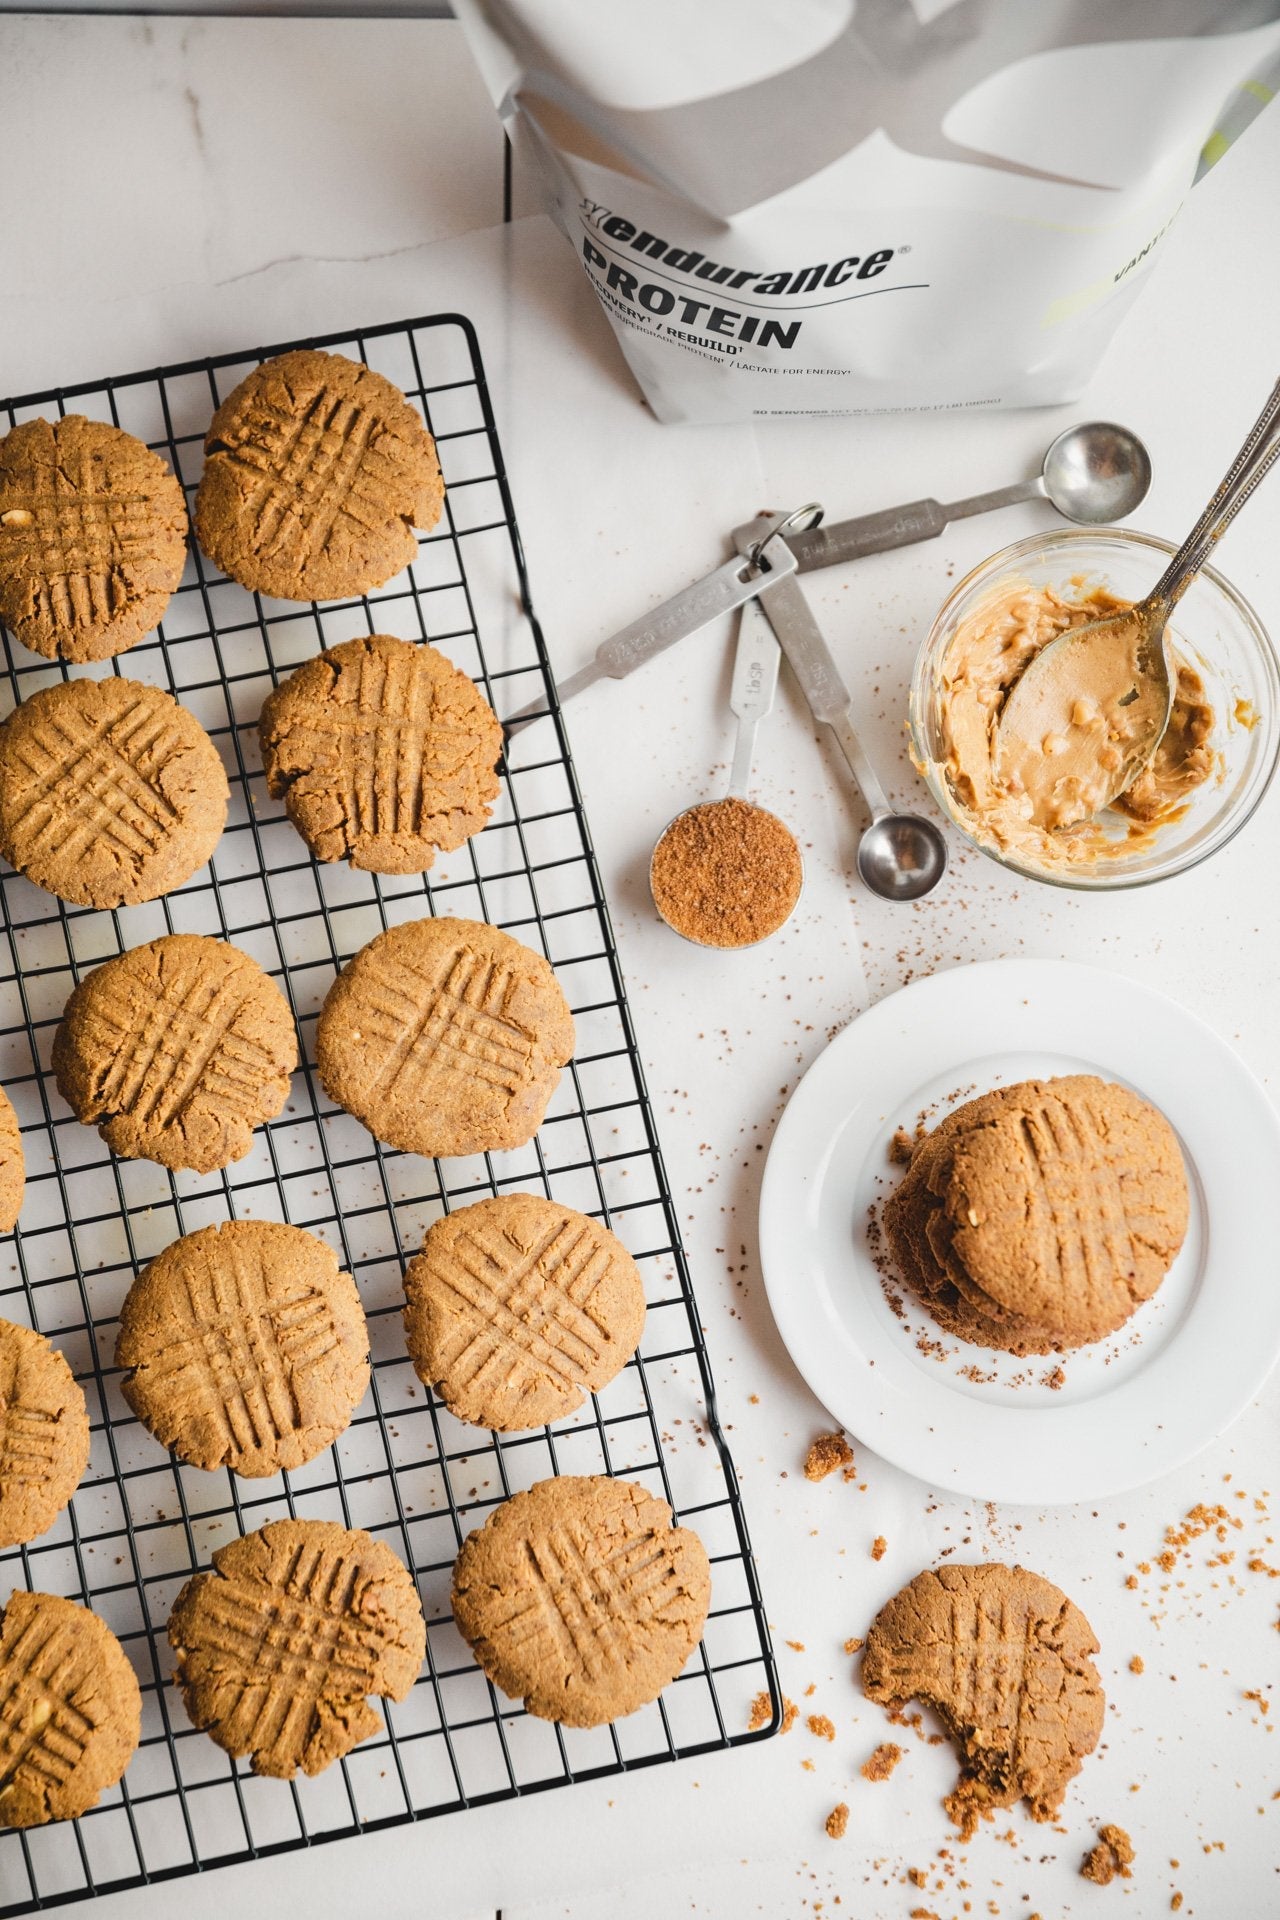 Peanut Butter Protein Cookies